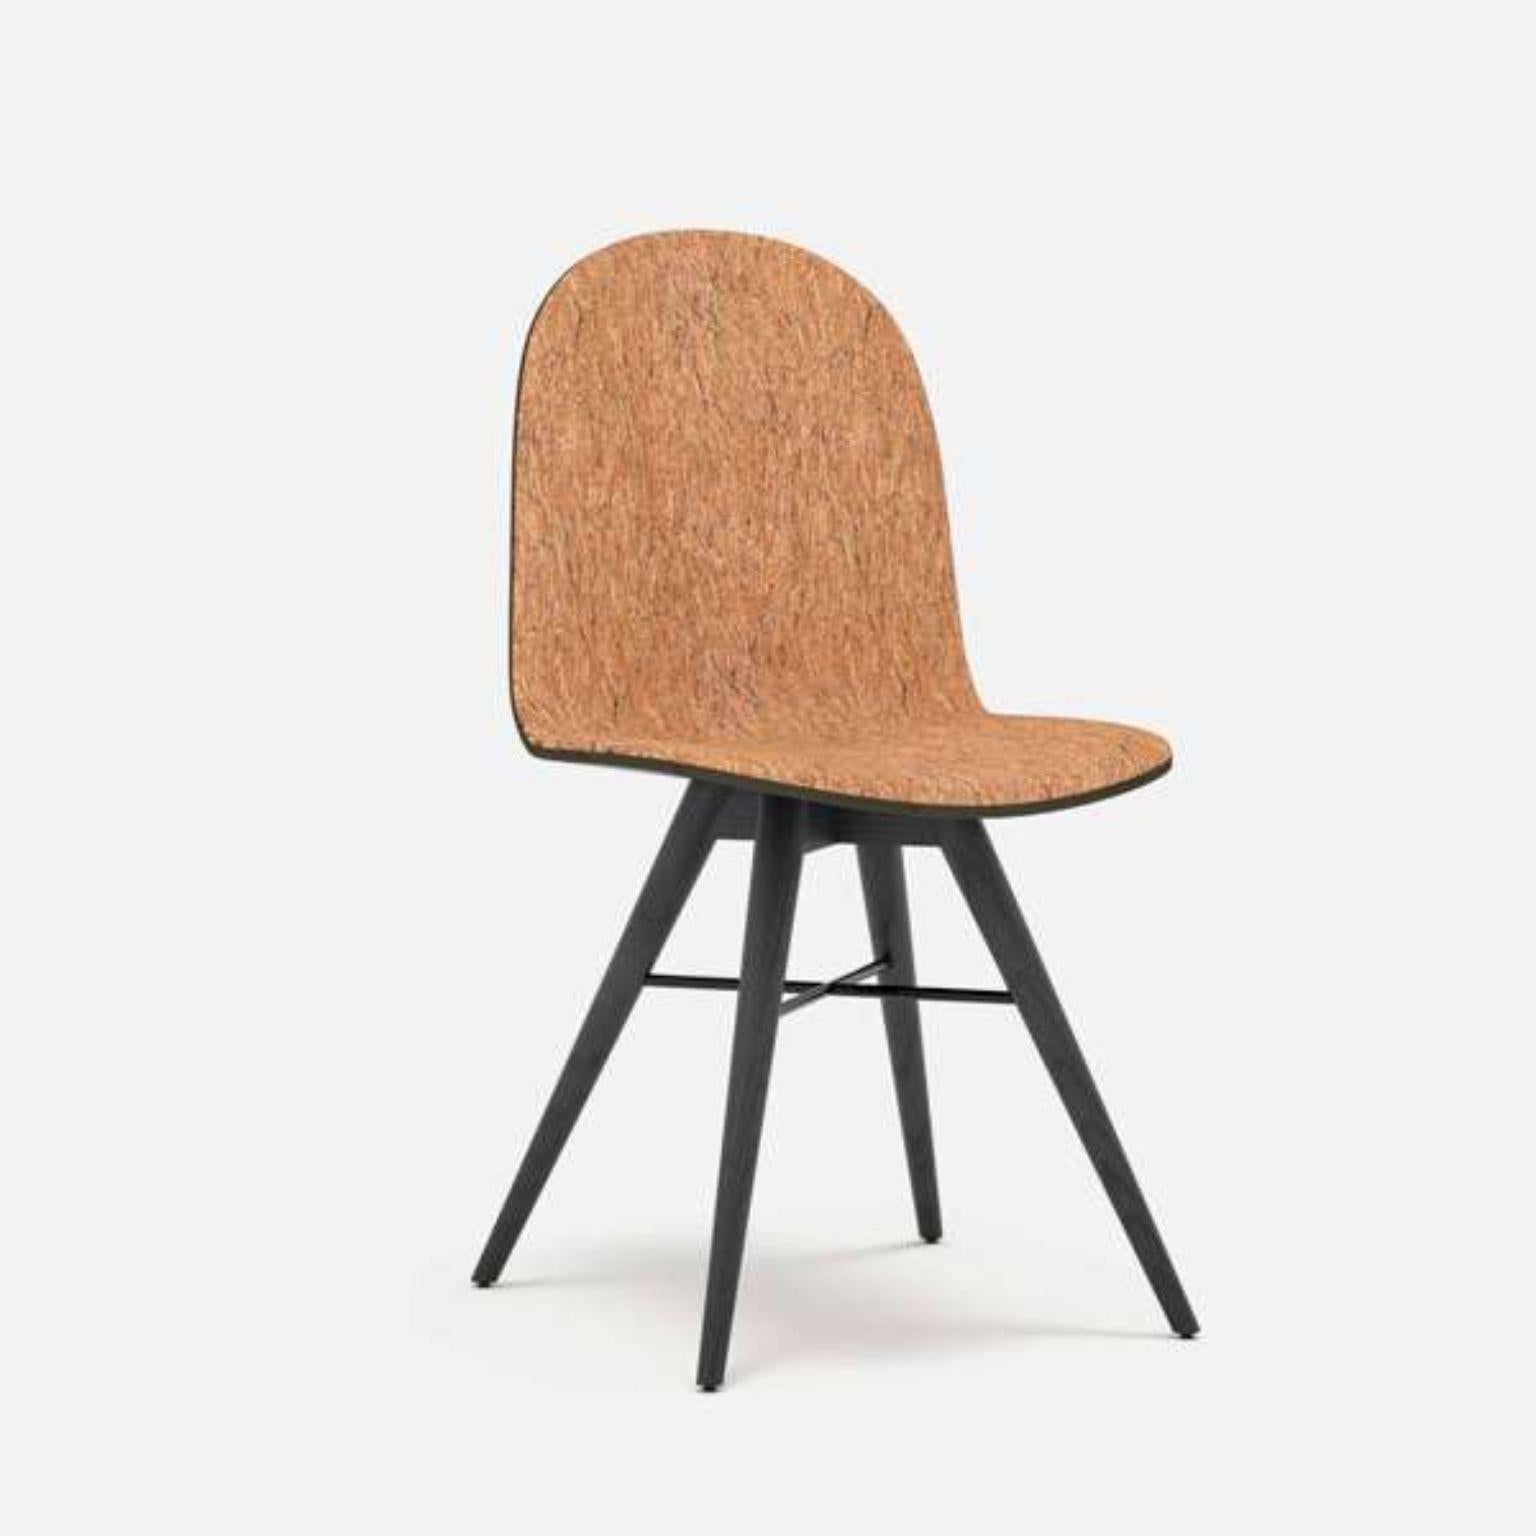 Portuguese Ash and Corkfabric Contemporary Chair by Alexandre Caldas For Sale